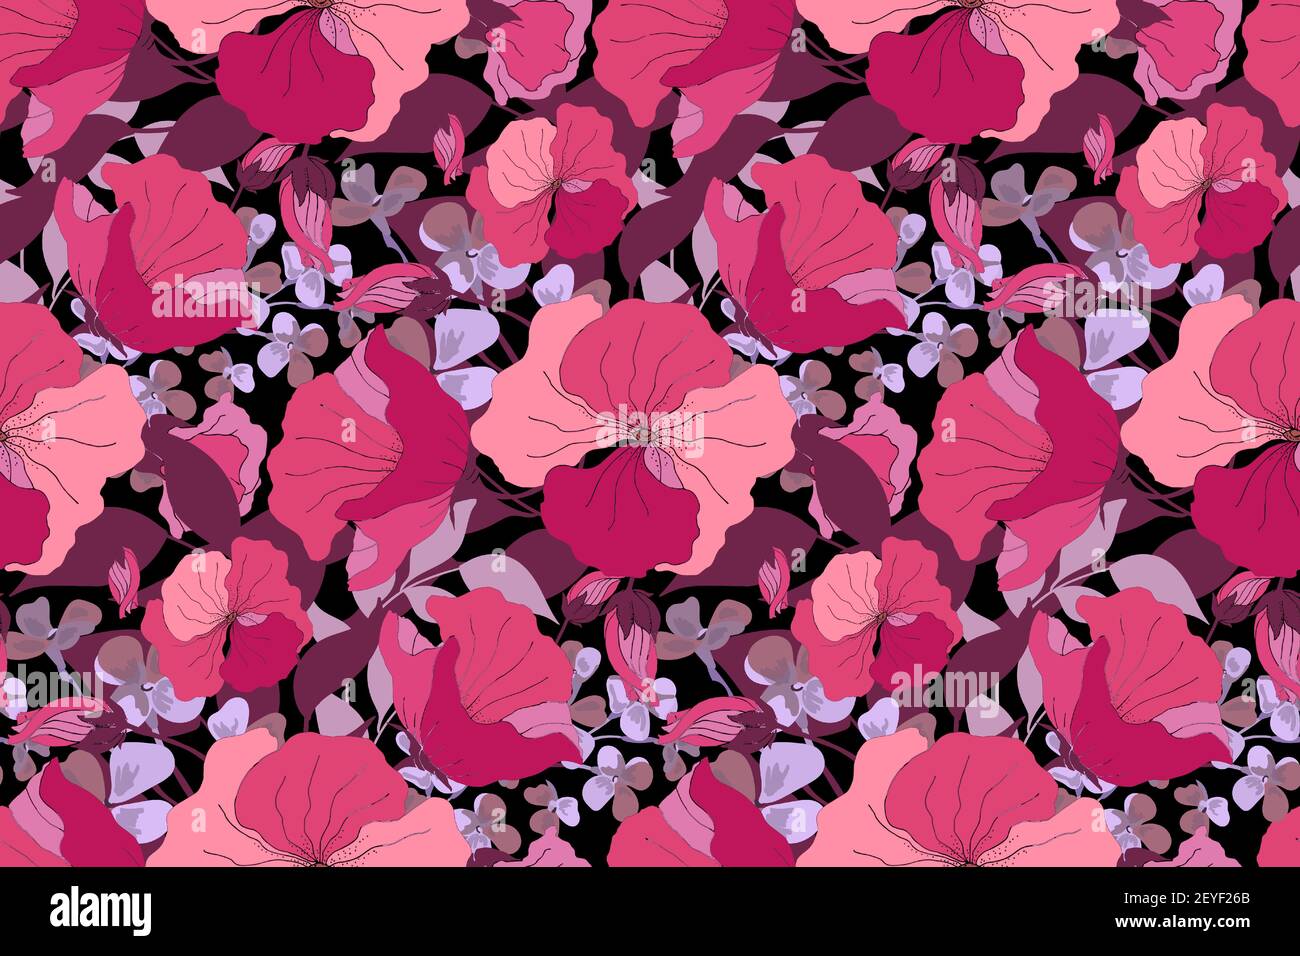 Vector floral seamless pattern. Floral bouquet. Pink, purple, violet, maroon vector flowers. Stock Vector